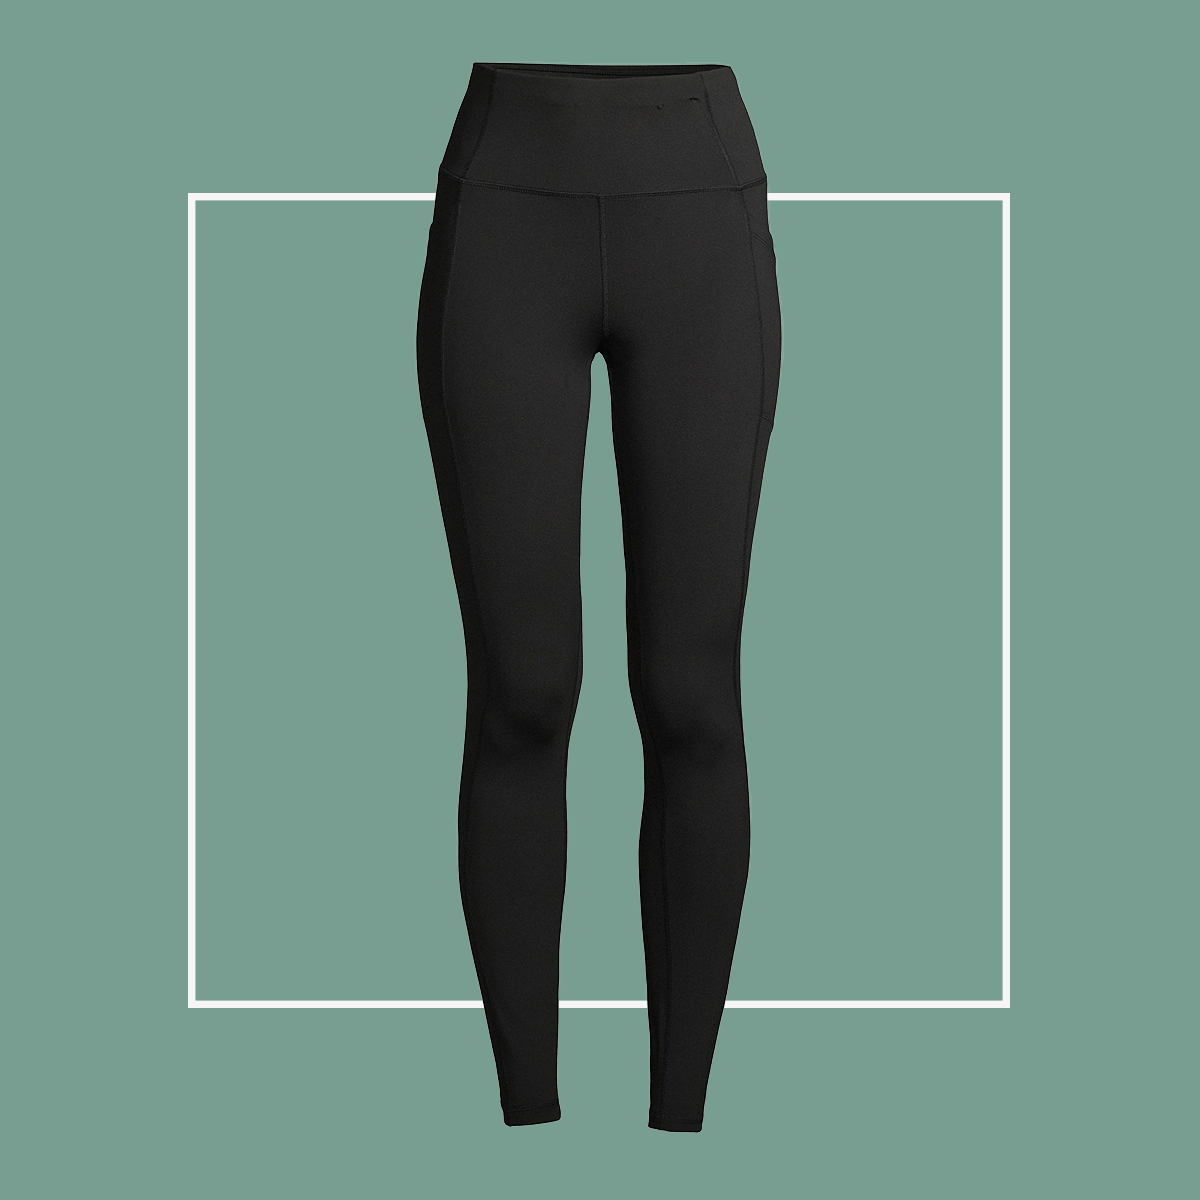 13 Best Leggings for Working Out in Warm Weather 2022